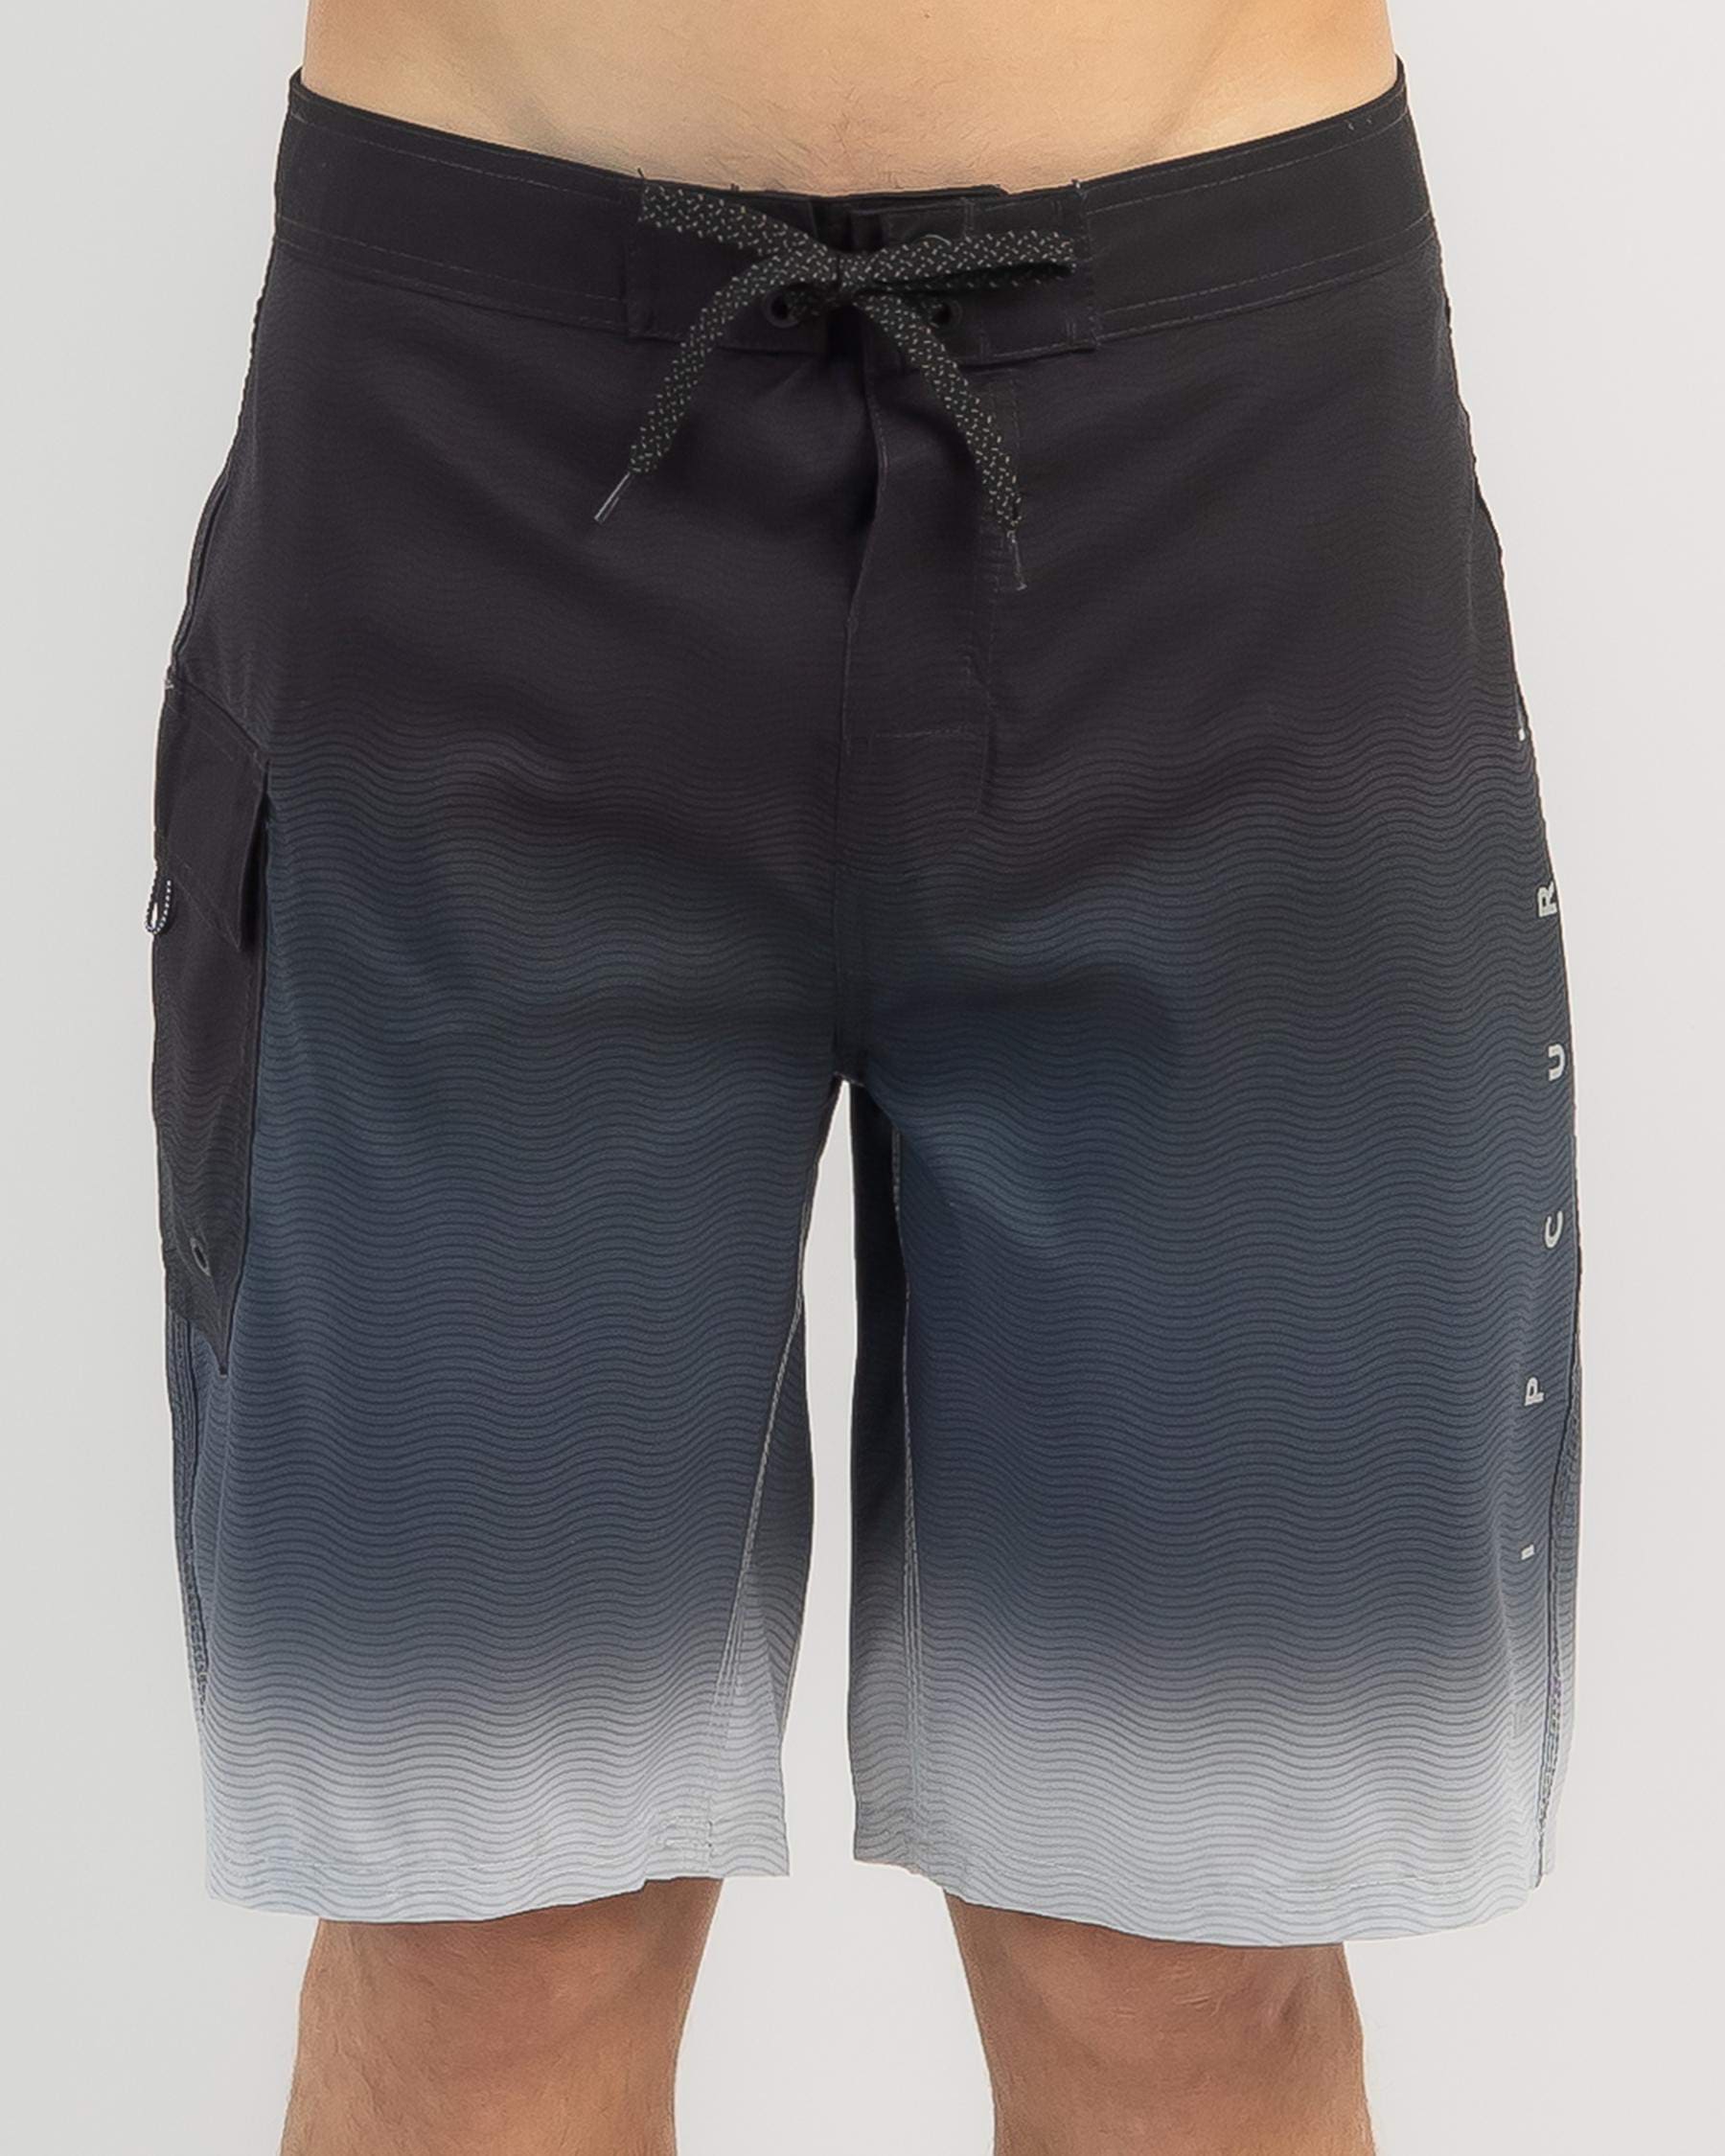 Rip Curl Shock Board Shorts In Black - Fast Shipping & Easy Returns ...